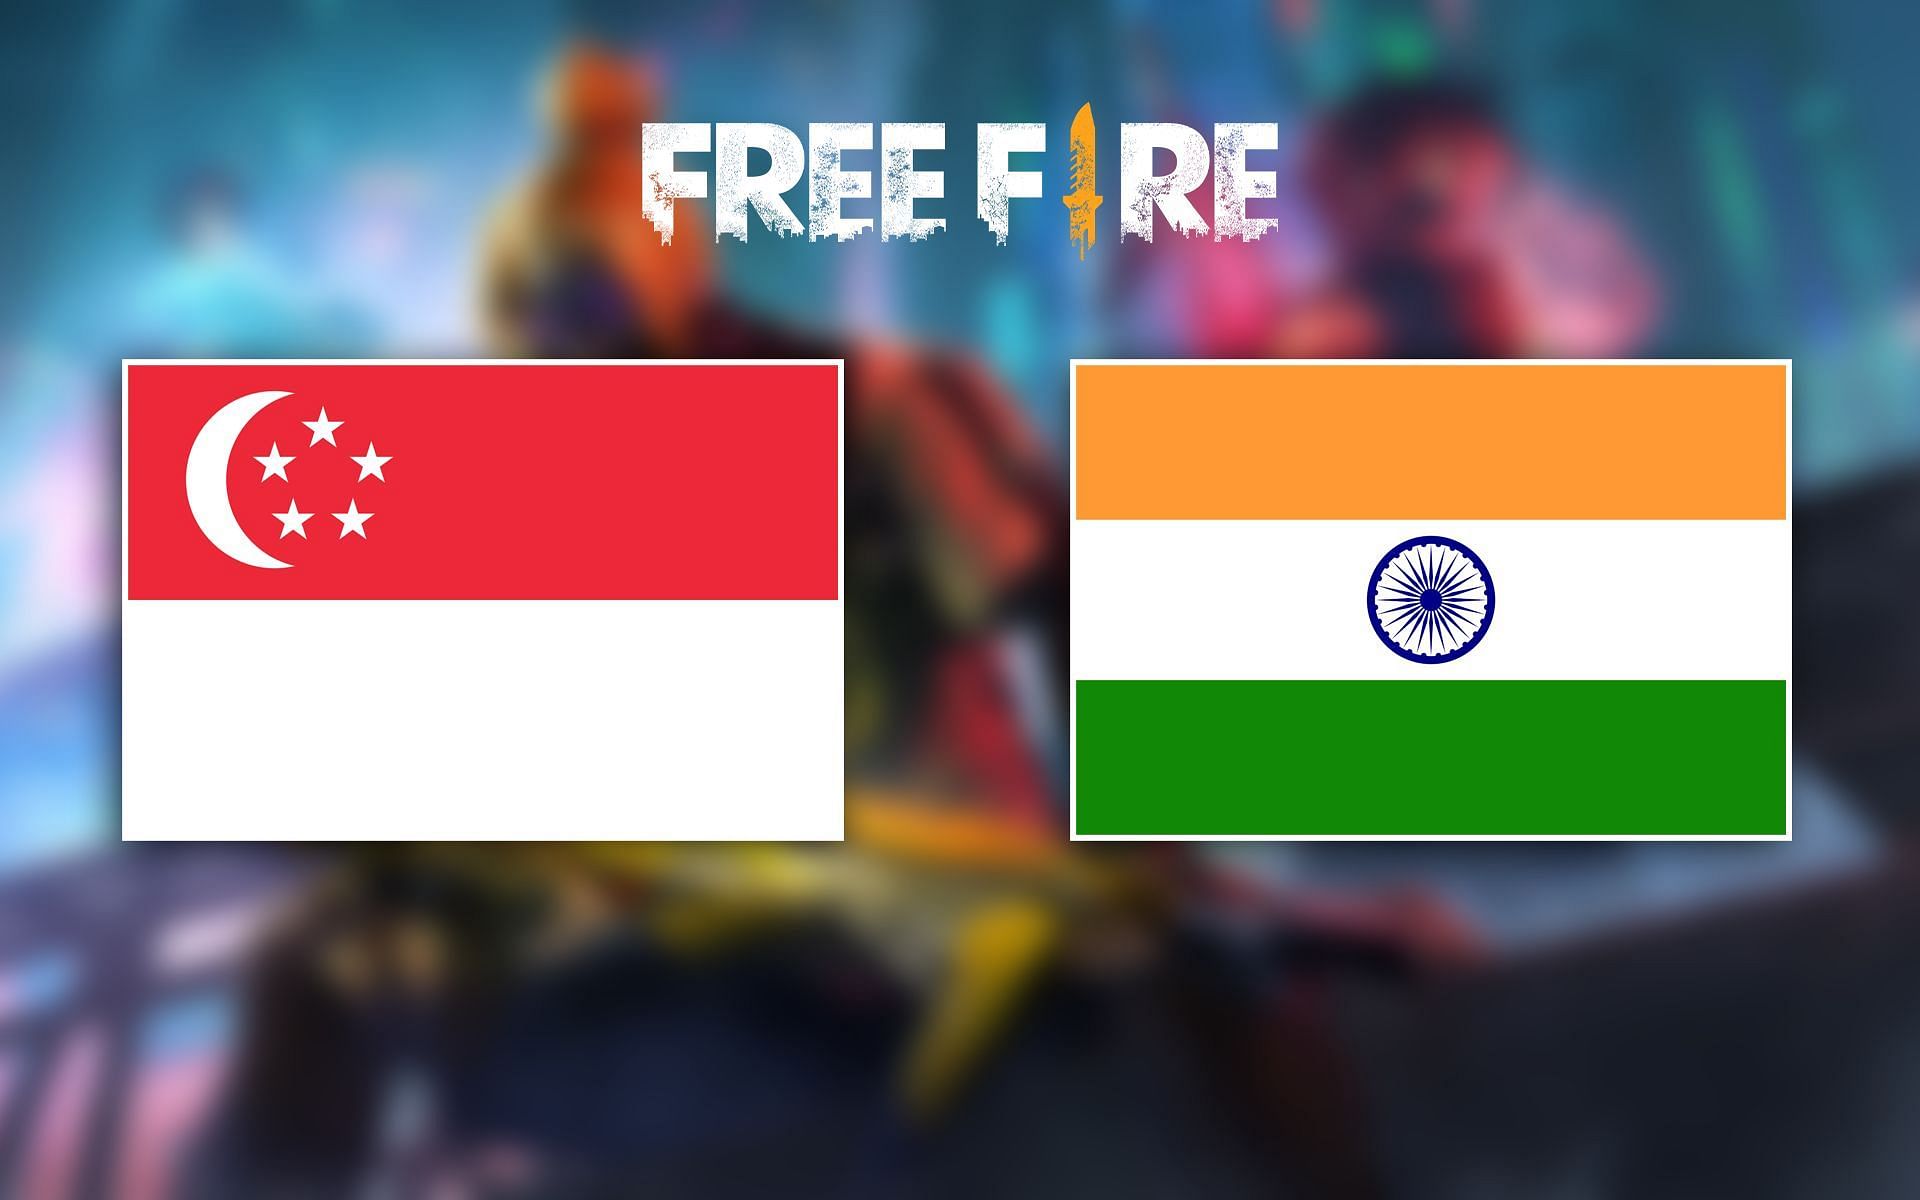 Singapore has reached out to India due to Free Fire ban (Image via Sportskeeda)